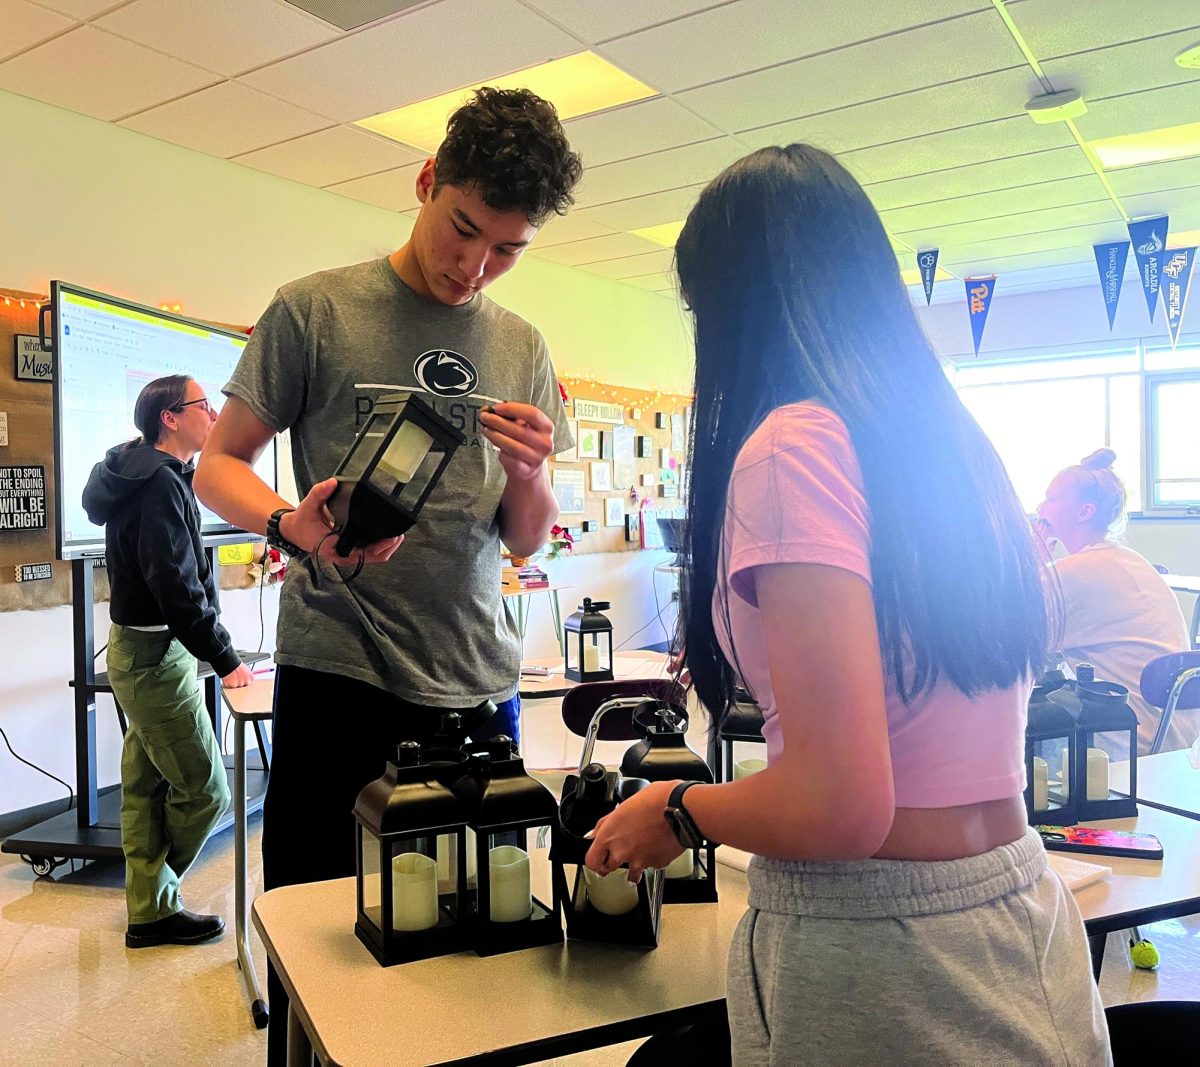 Getting ready…To prepare for the April 27 junior prom, Student Government members Colton Musselman (left) and Kayla Lelina sort decorations. The Class of 2025 must begin the decorating process by assemeling lanterns. 
